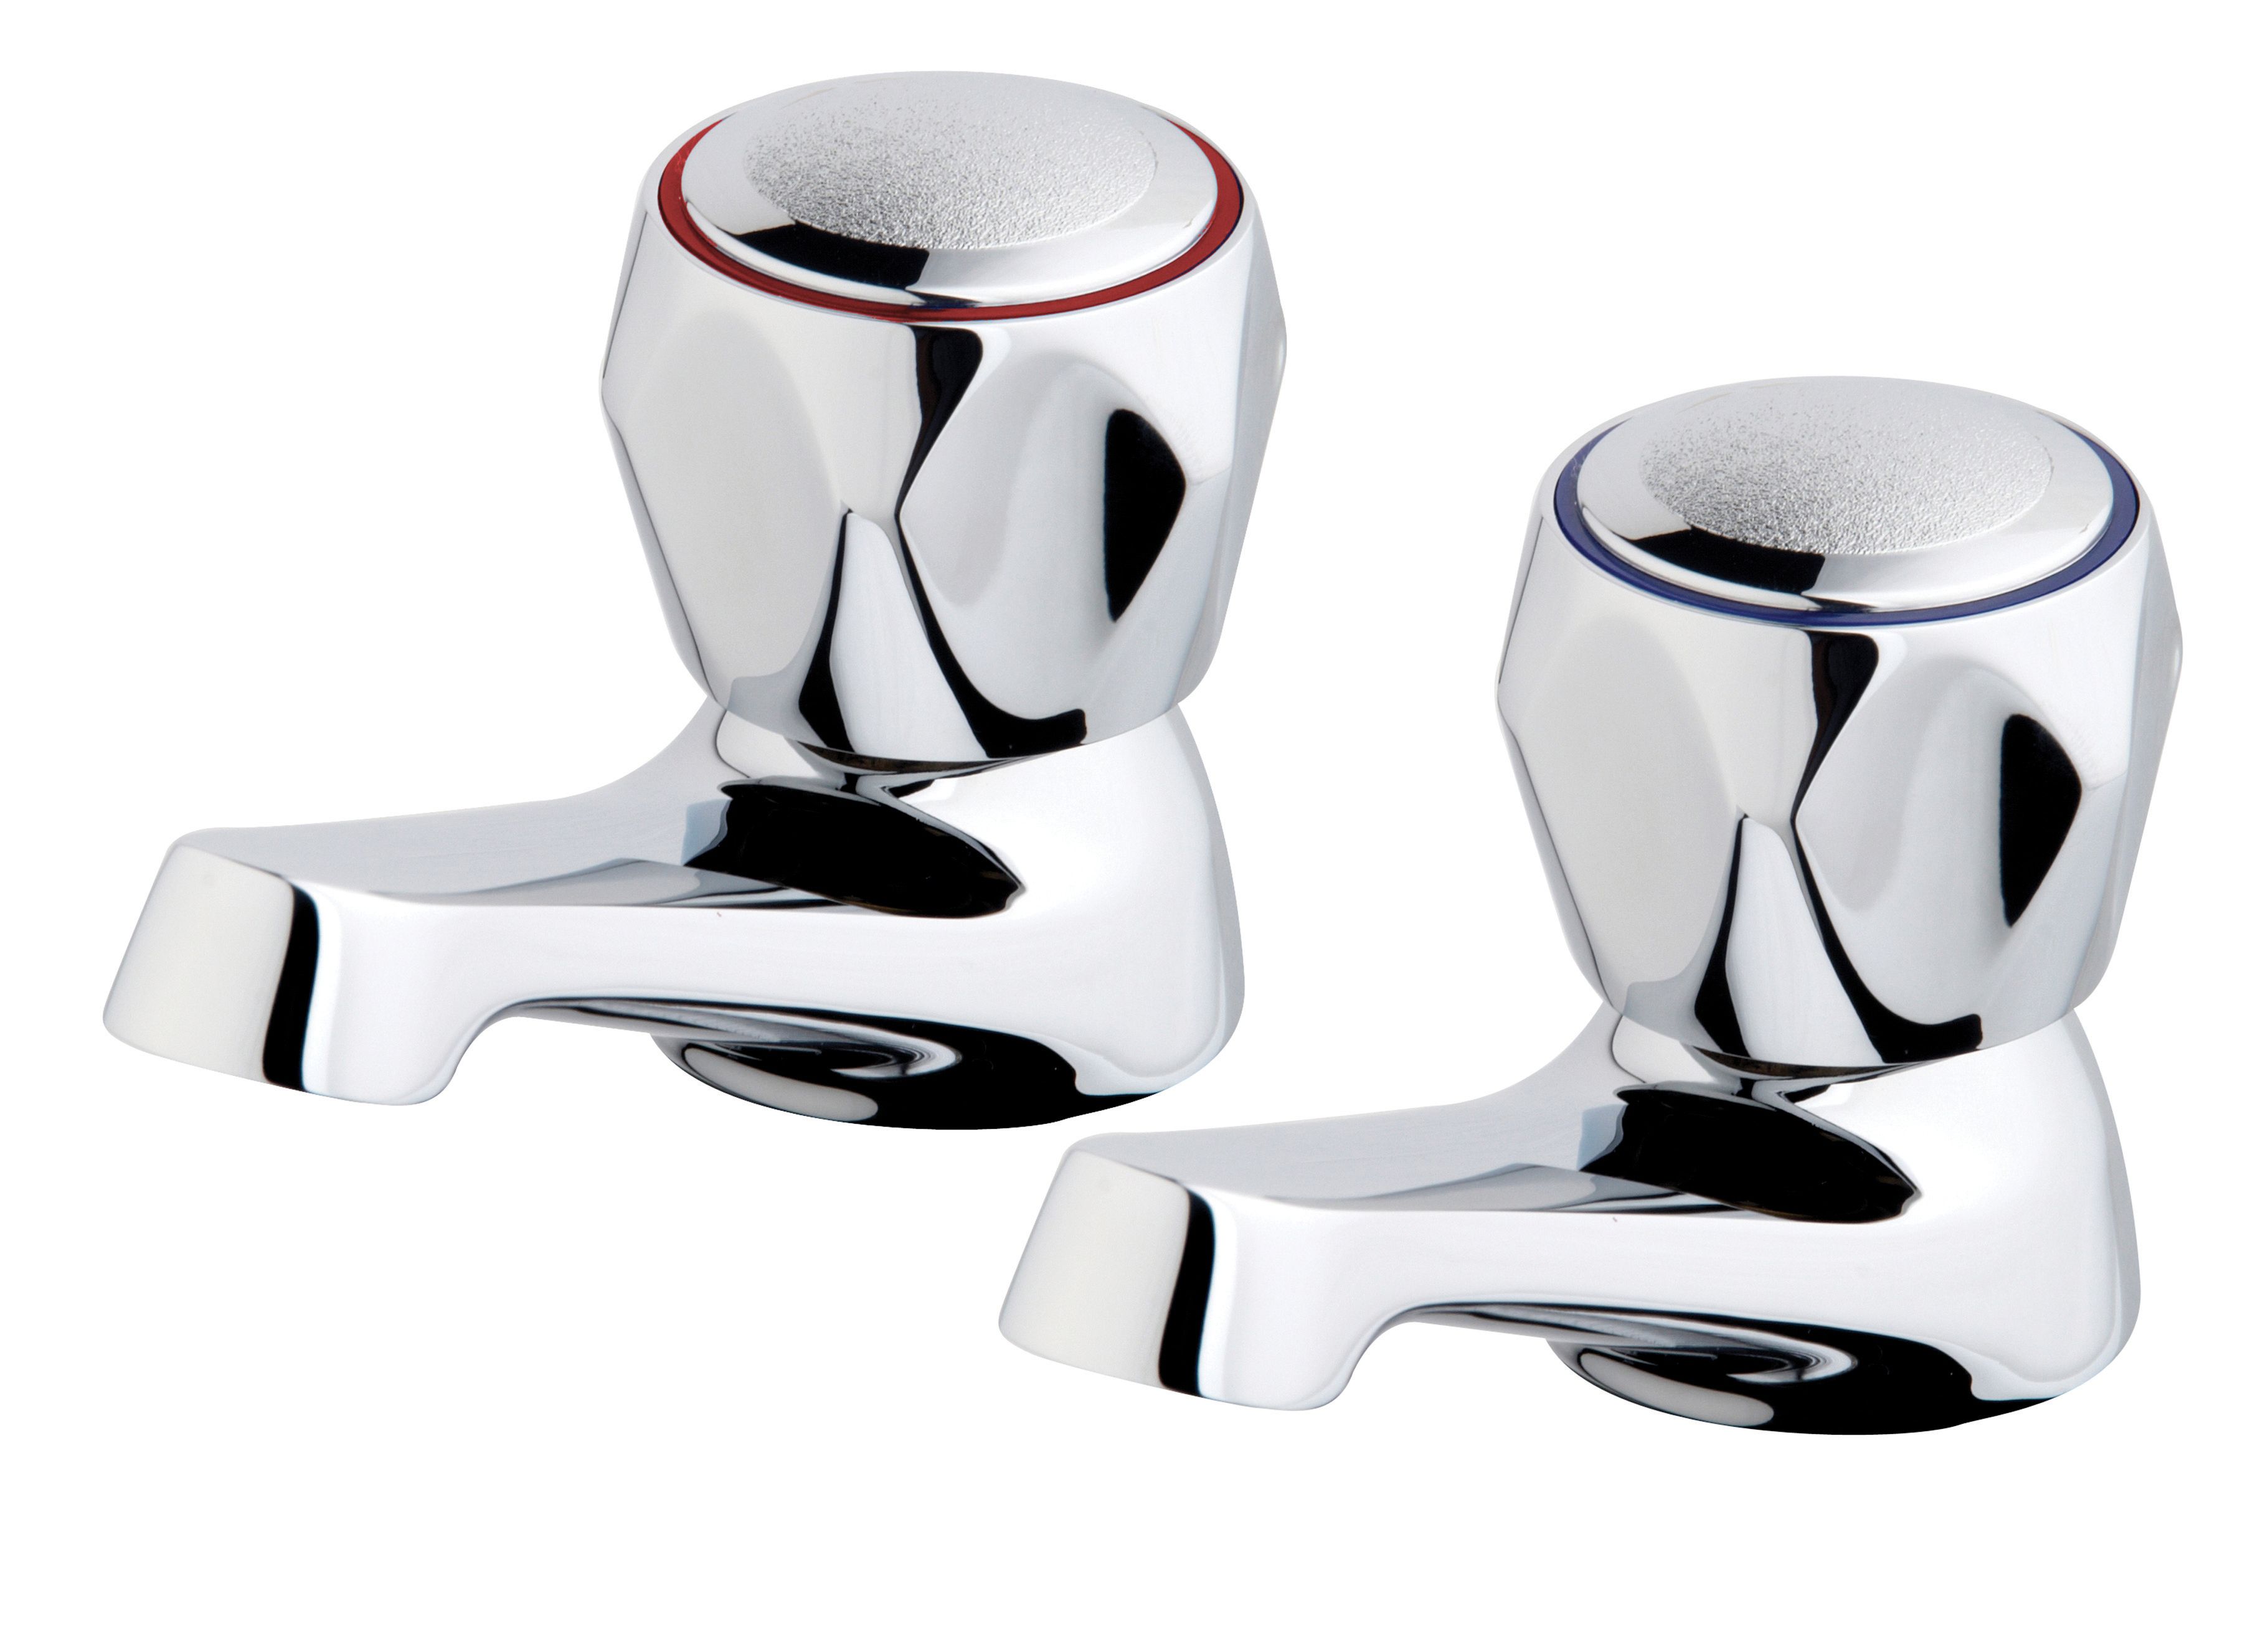 Image of Wickes Trade Chrome Basin Taps